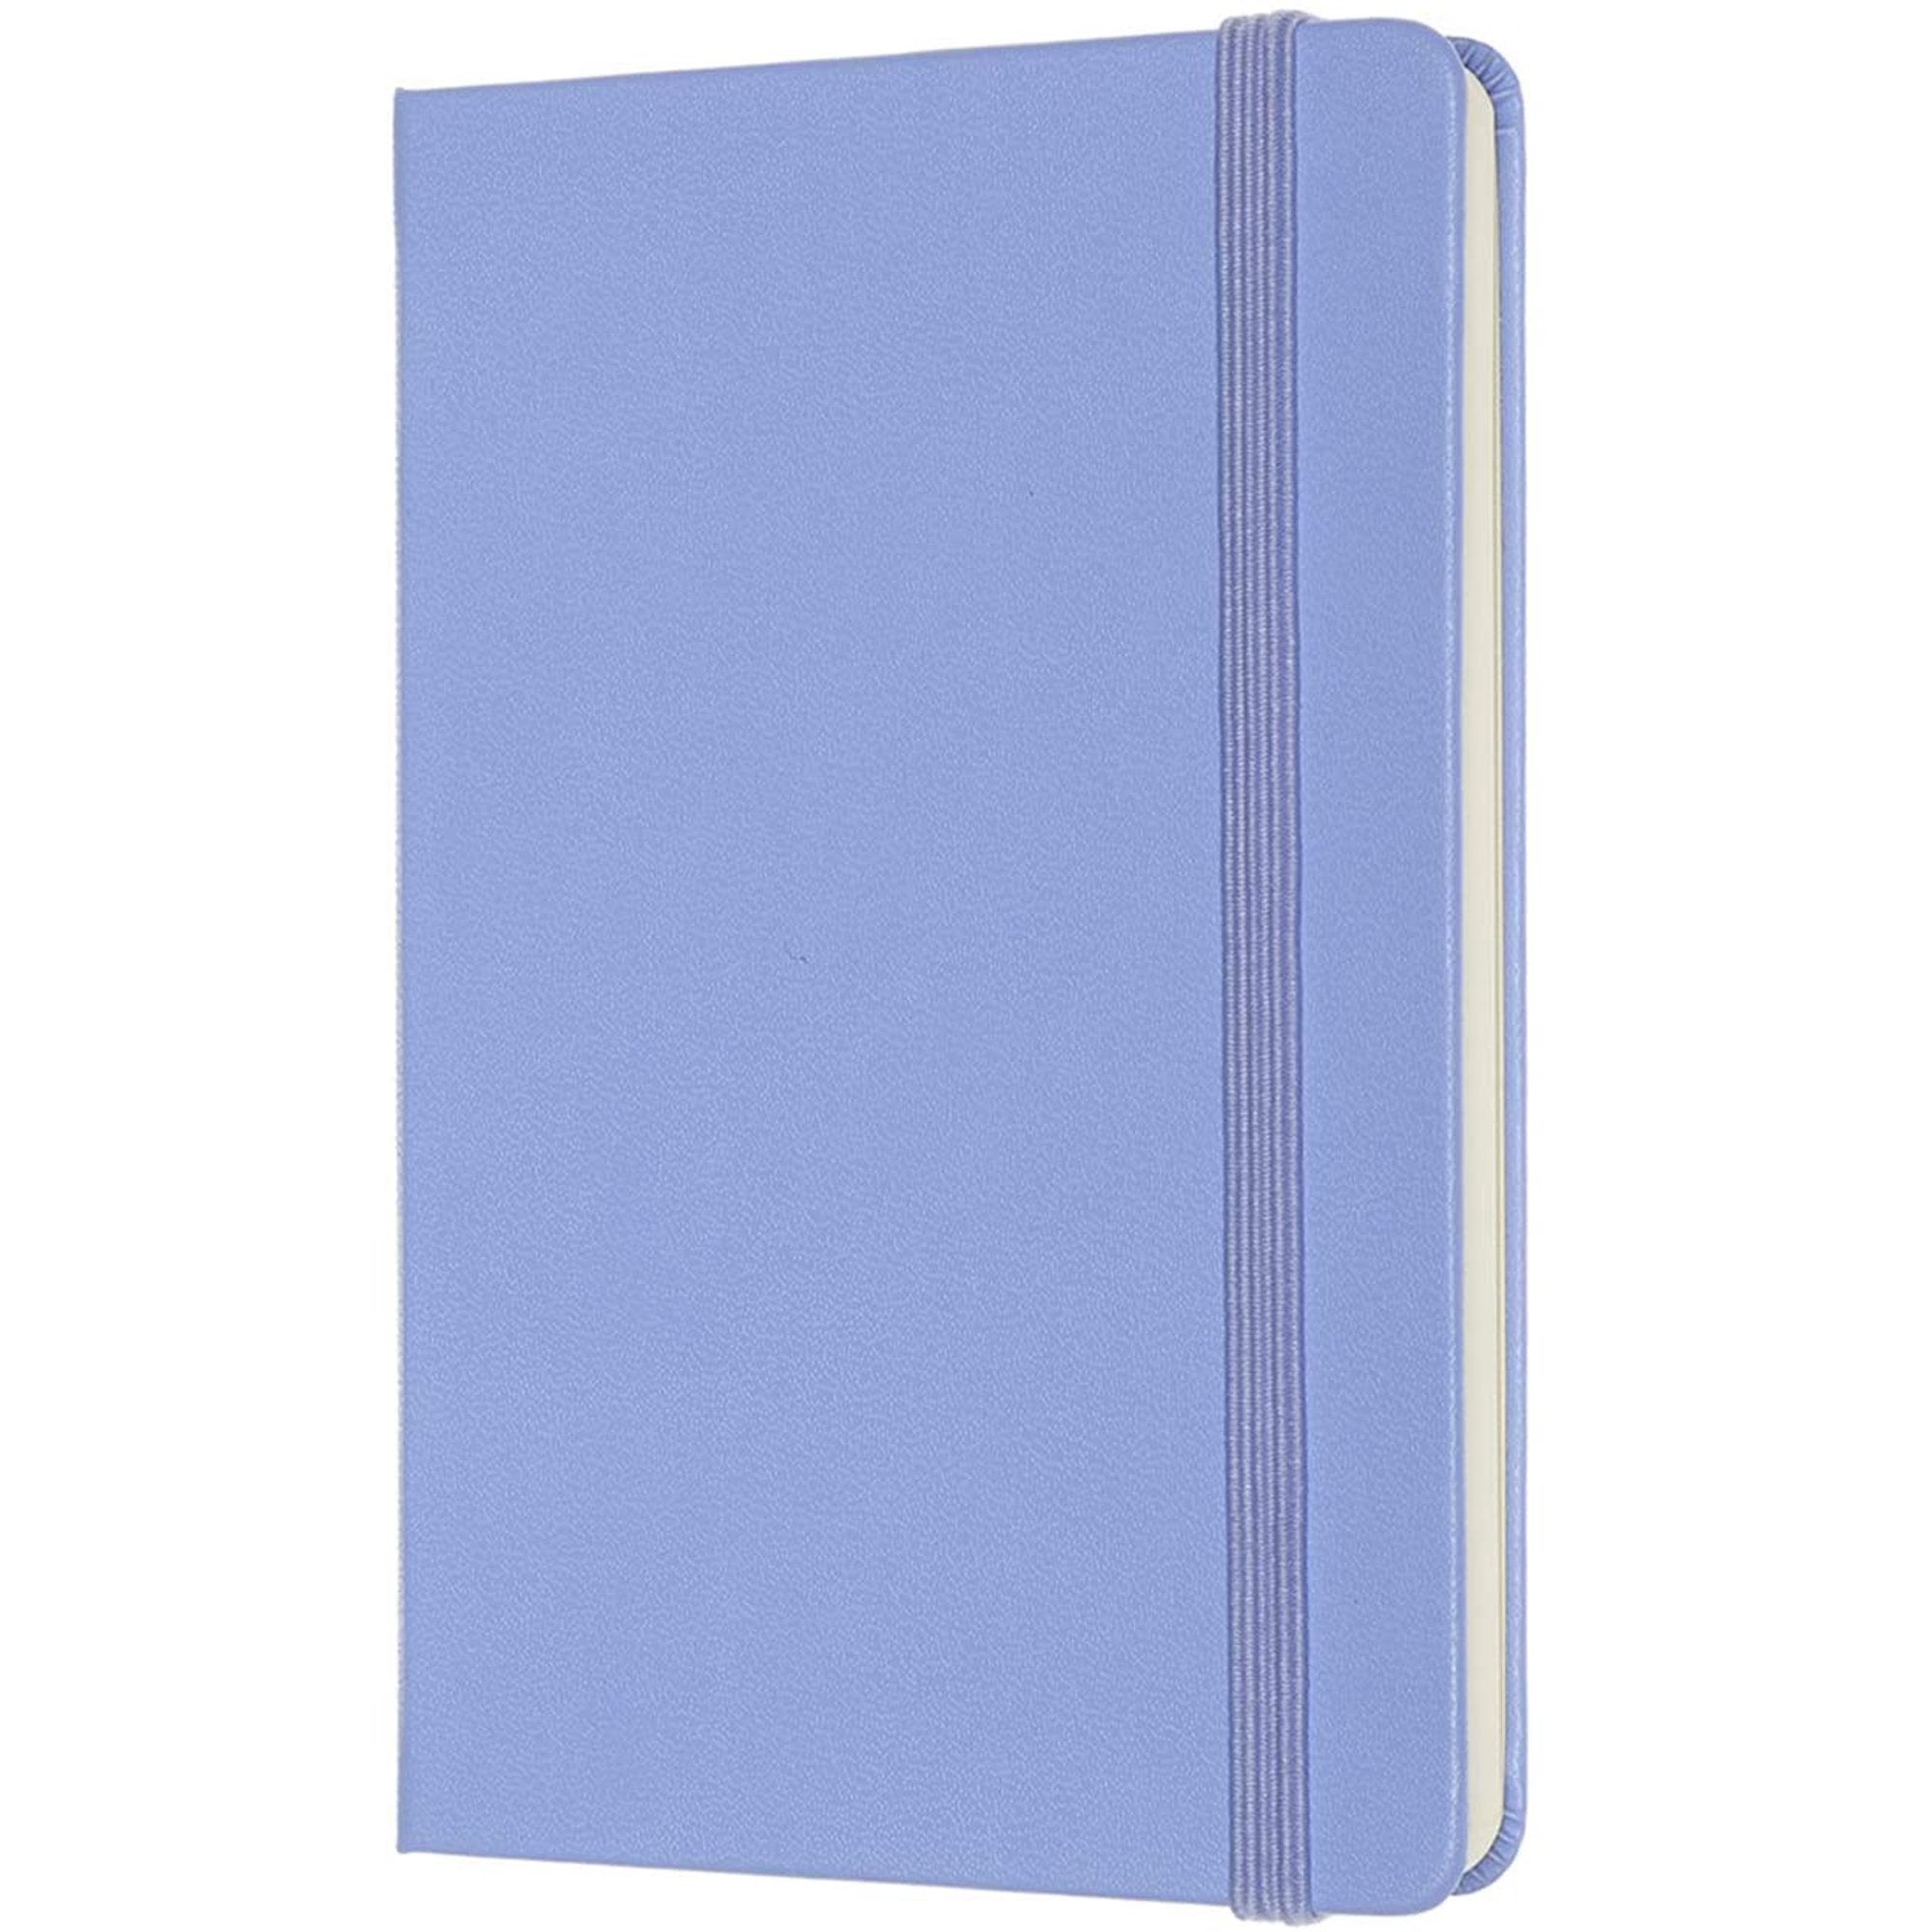 Moleskine Notebook Classic Large Hydrangea Blue Soft Cover - Lined